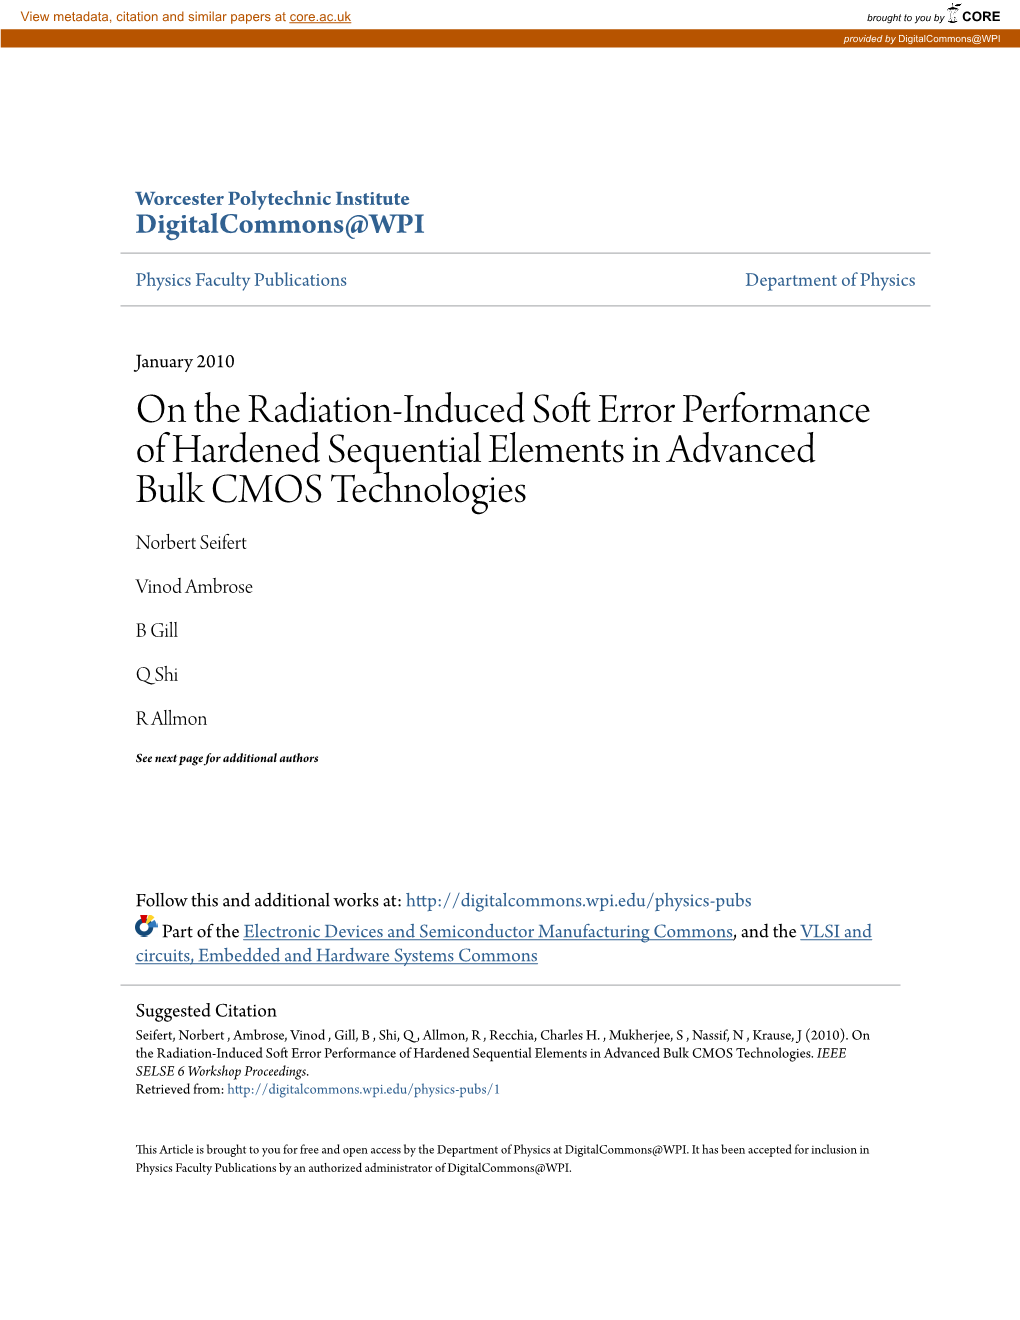 On the Radiation-Induced Soft Error Performance of Hardened Sequential Elements in Advanced Bulk CMOS Technologies N